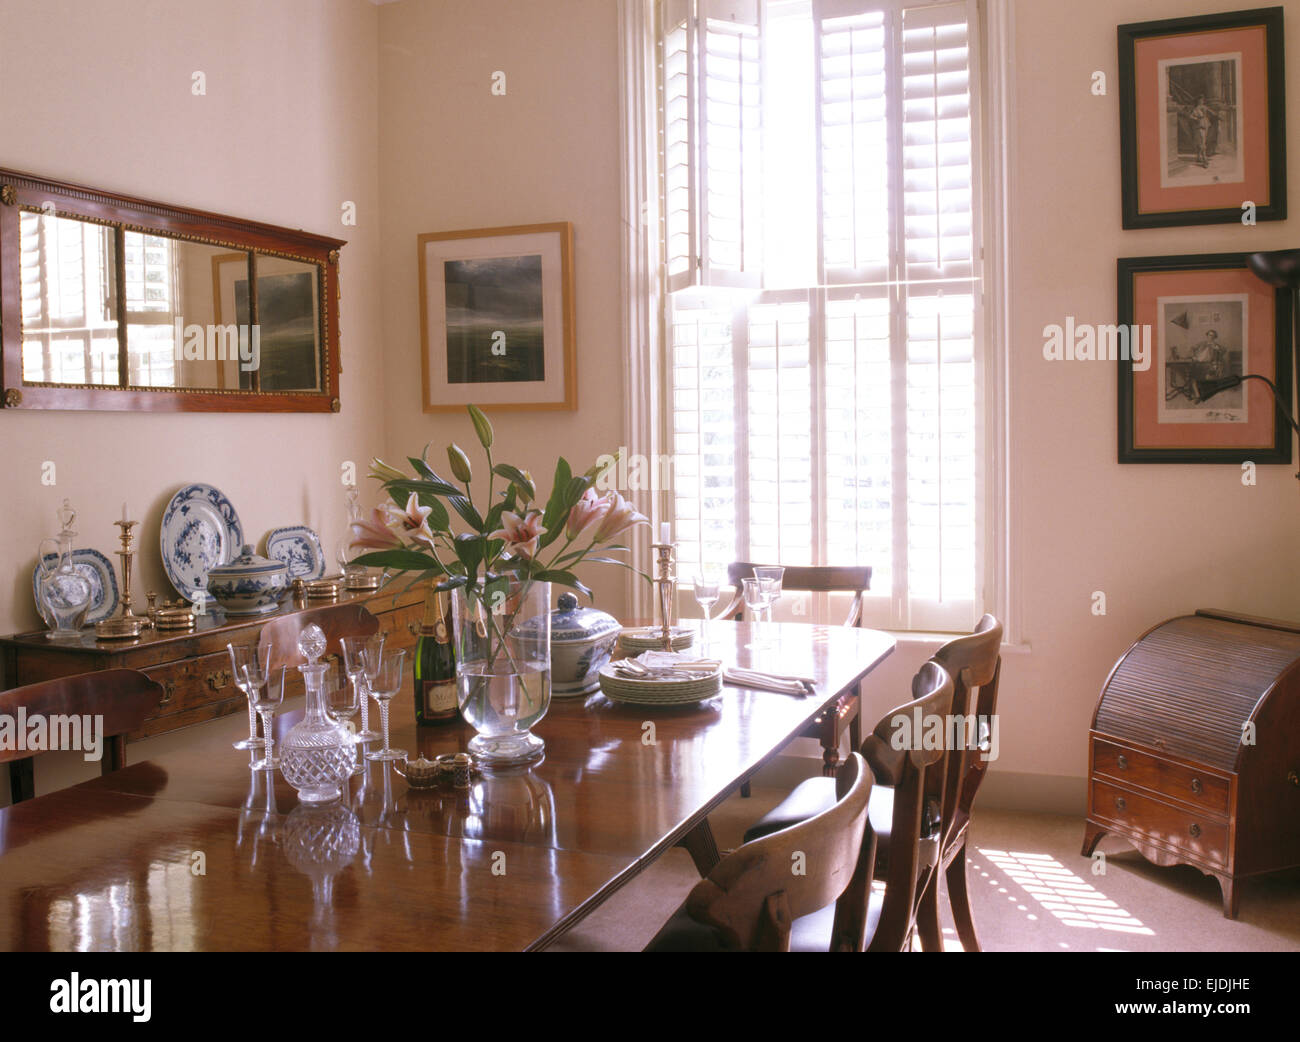 Glassware on table in traditional dining room with plantation shutters on the window Stock Photo